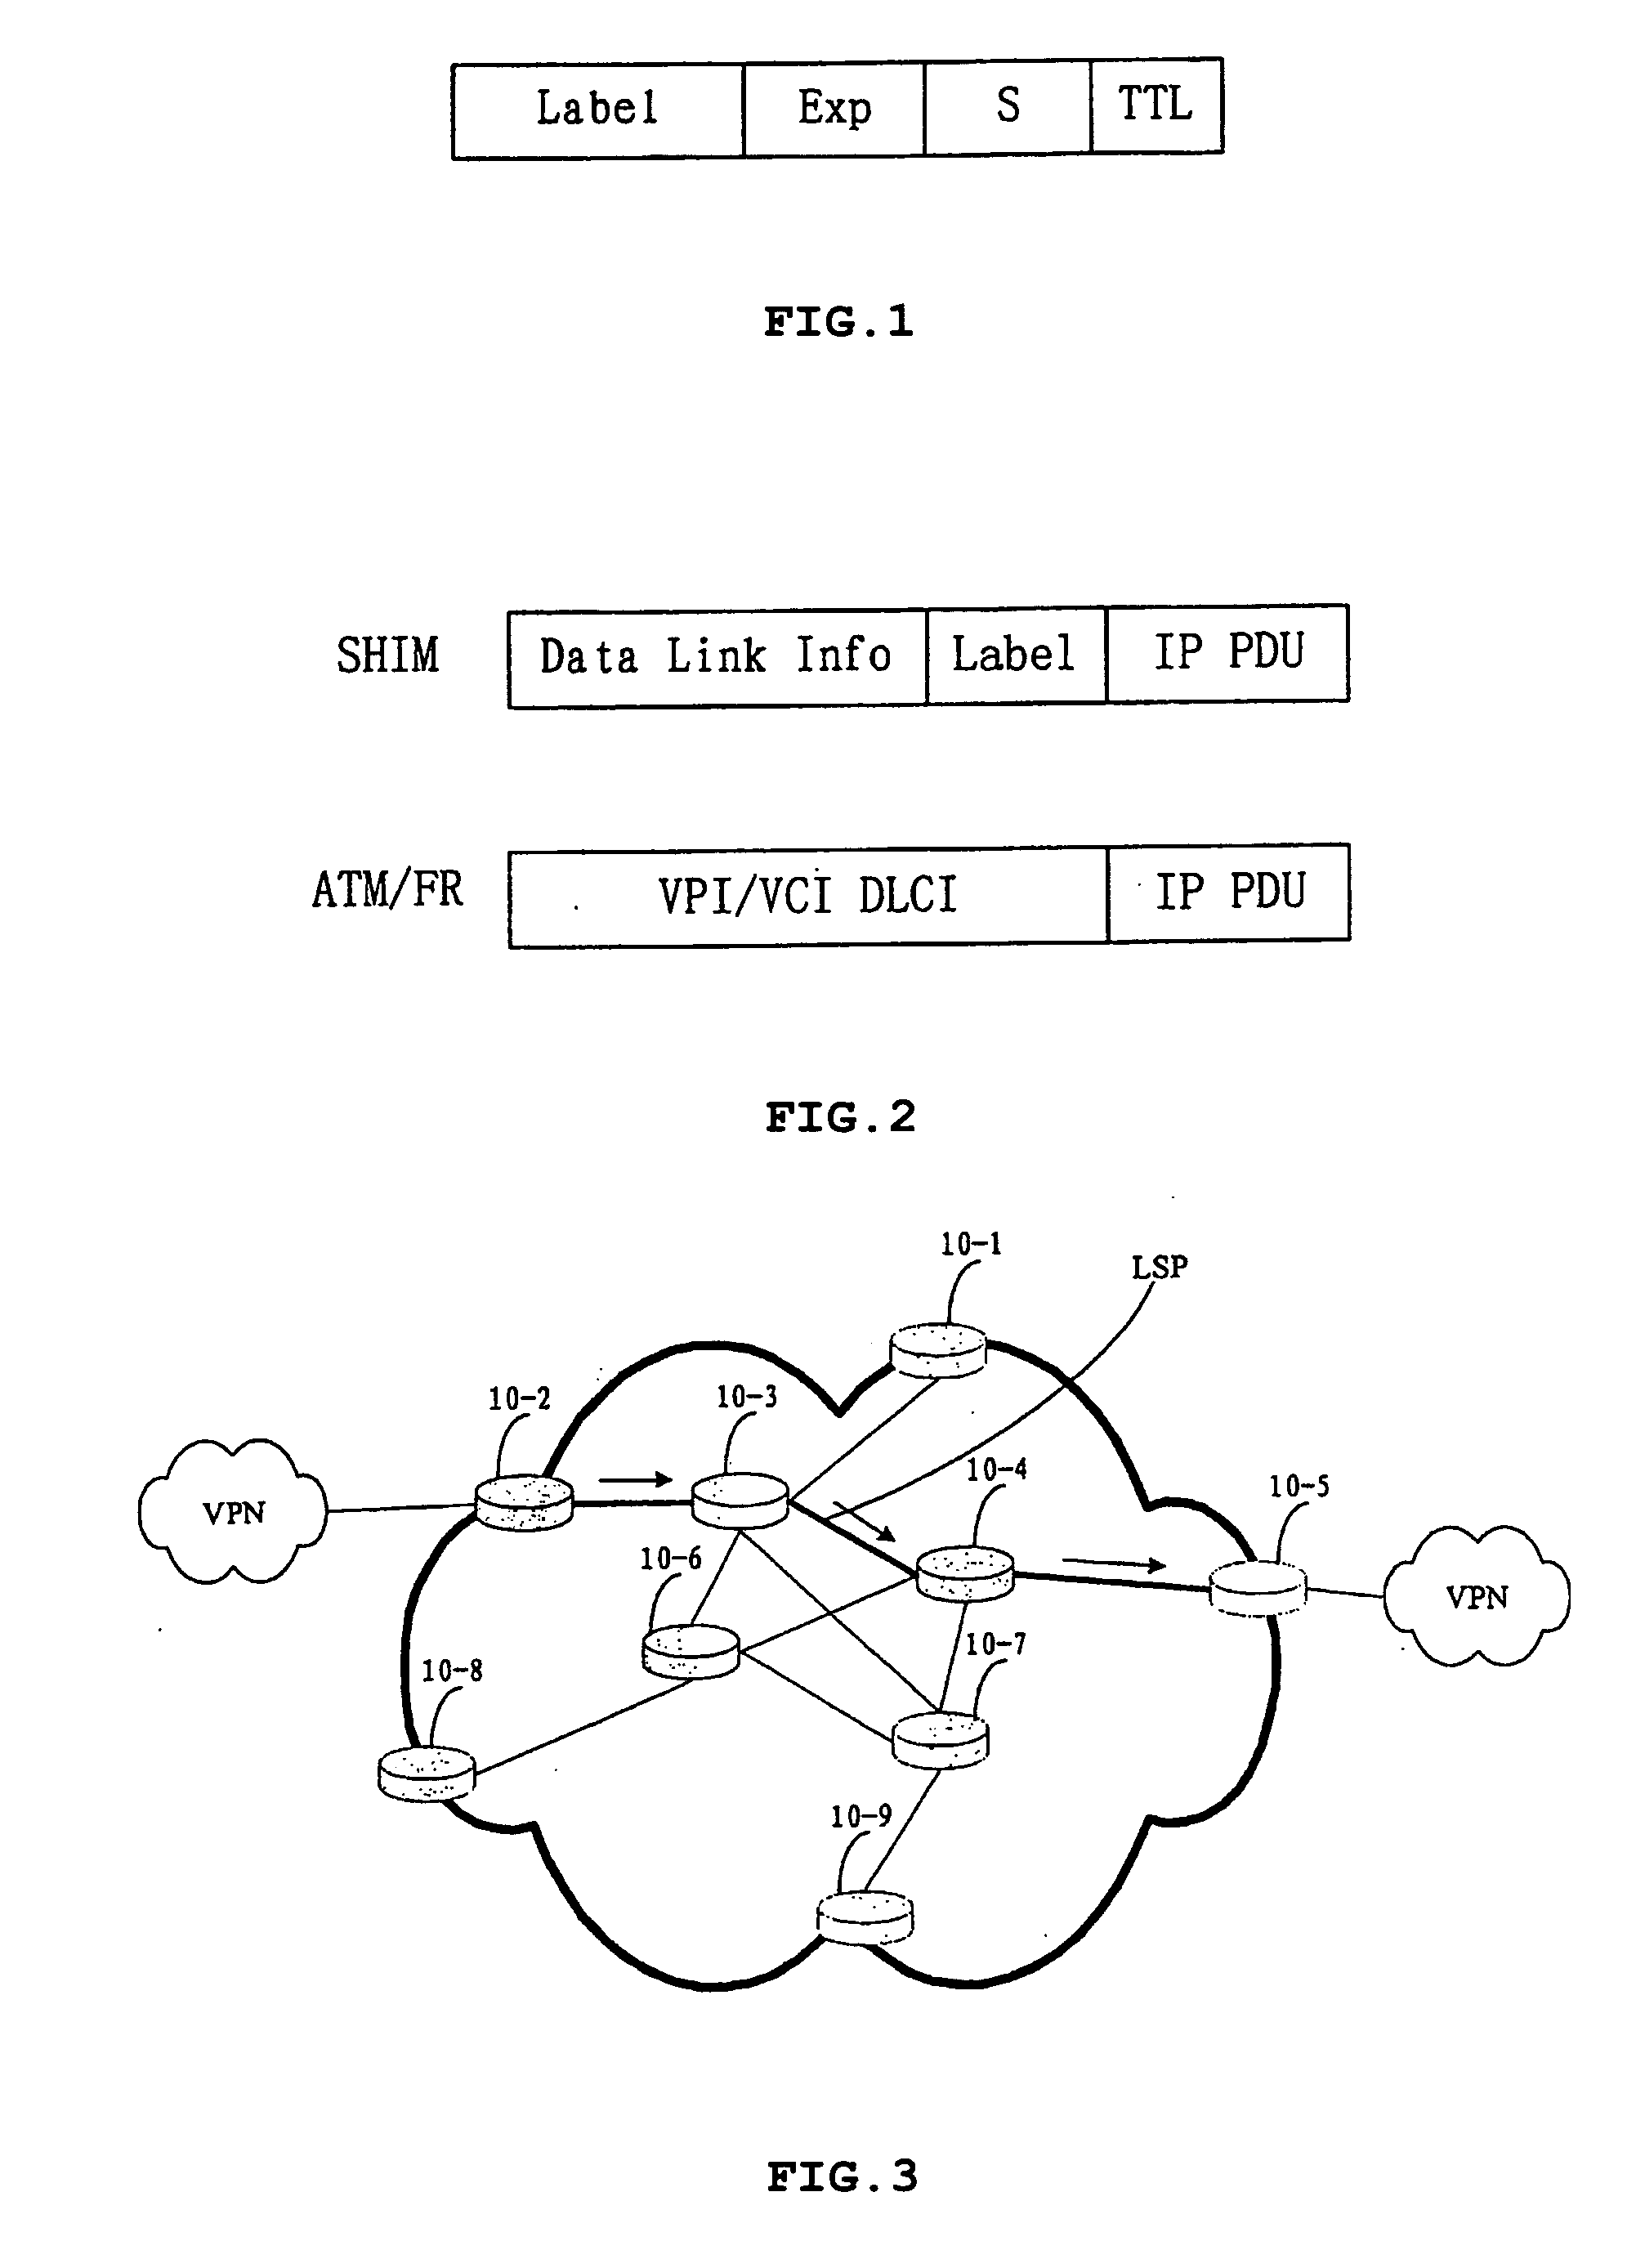 Method for implementing the virtual leased line